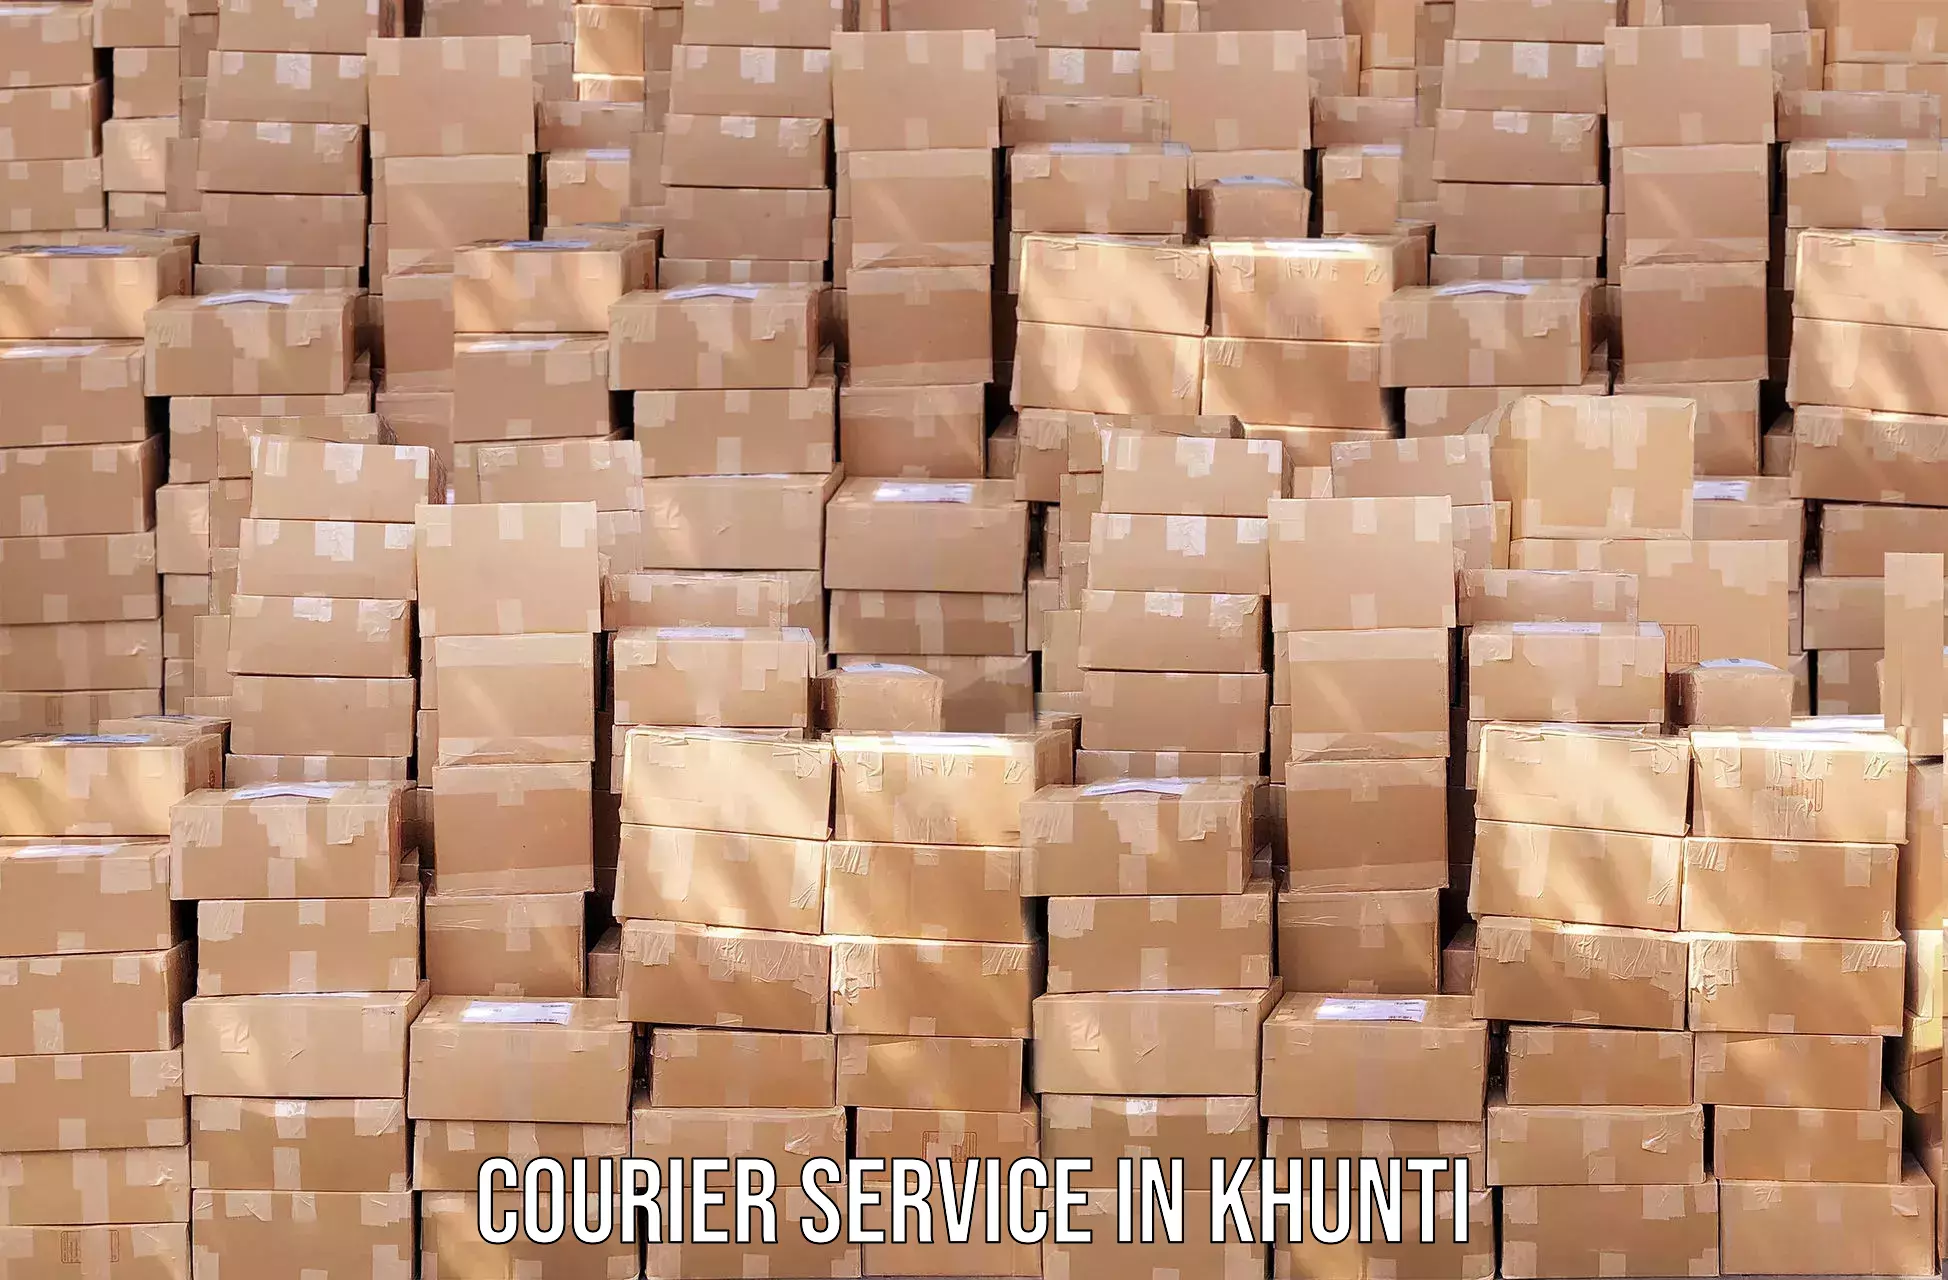 Efficient shipping platforms in Khunti